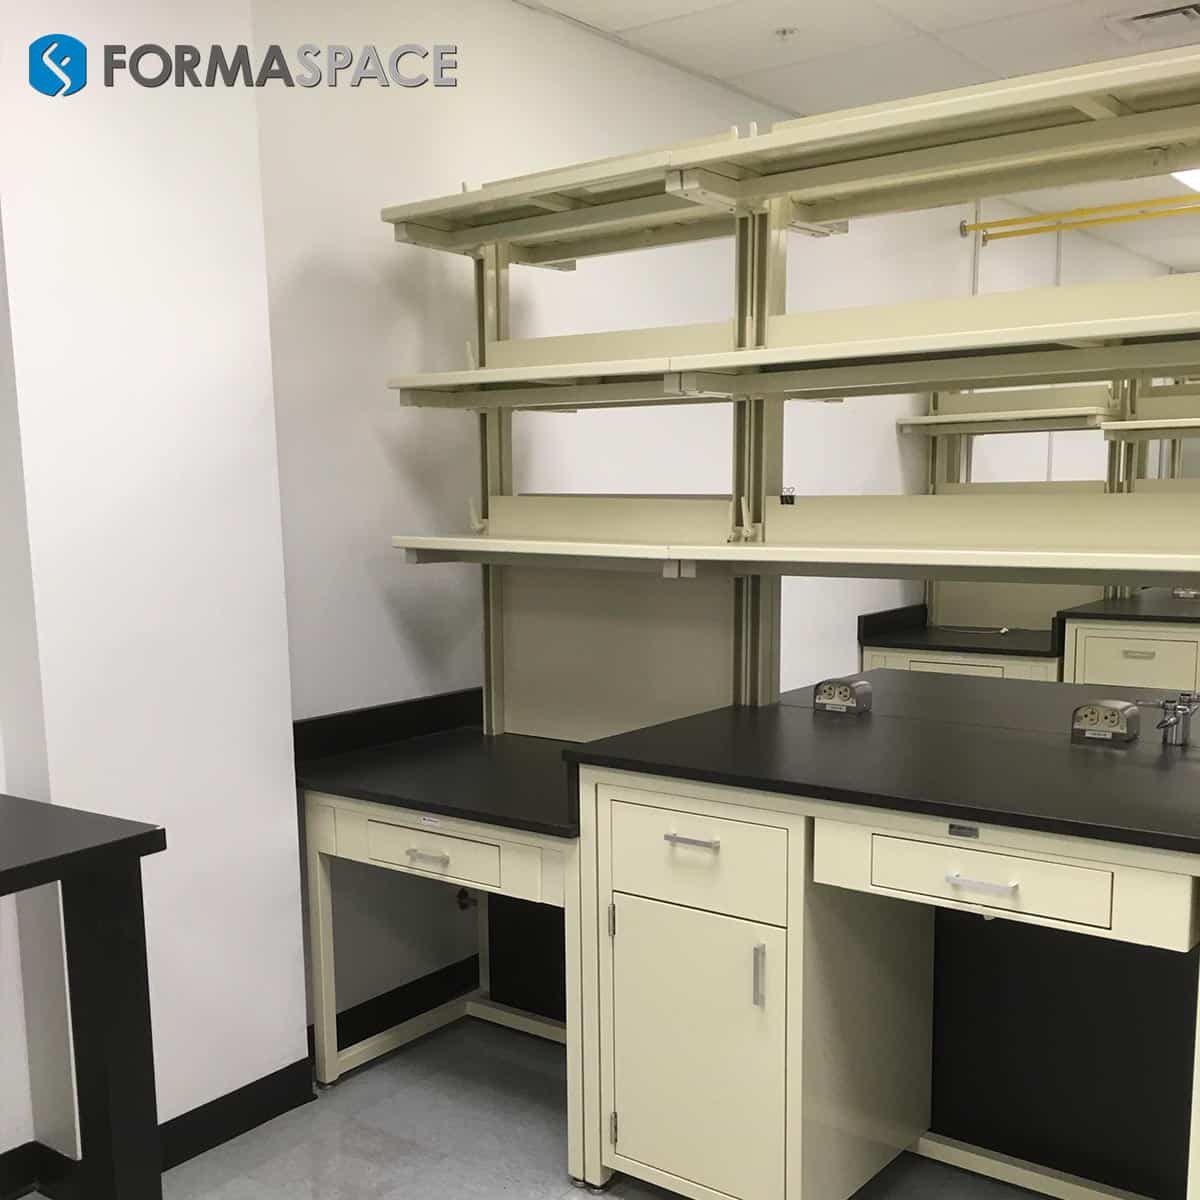 casework and reagent shelves